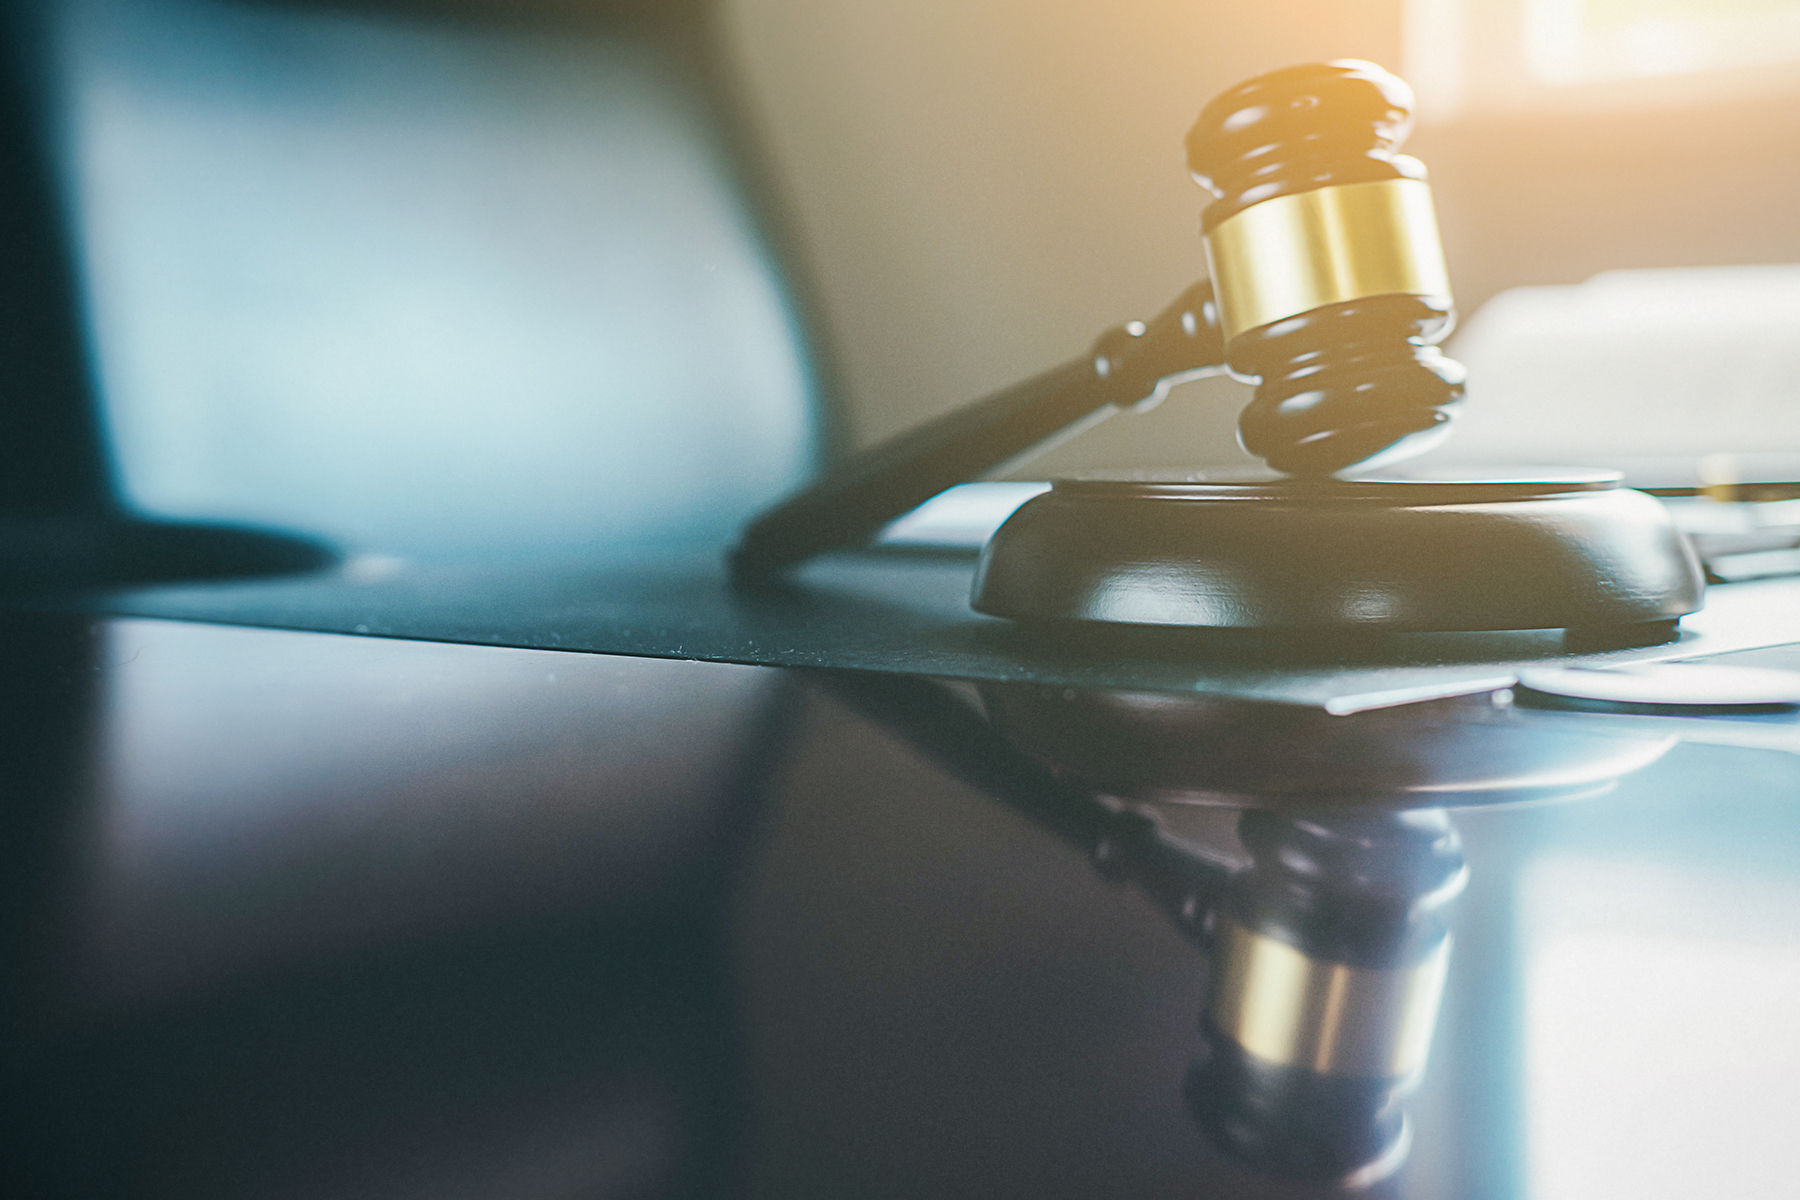 A gavel on a desk under a soft light, evoking the atmosphere of a courtroom or legal setting.